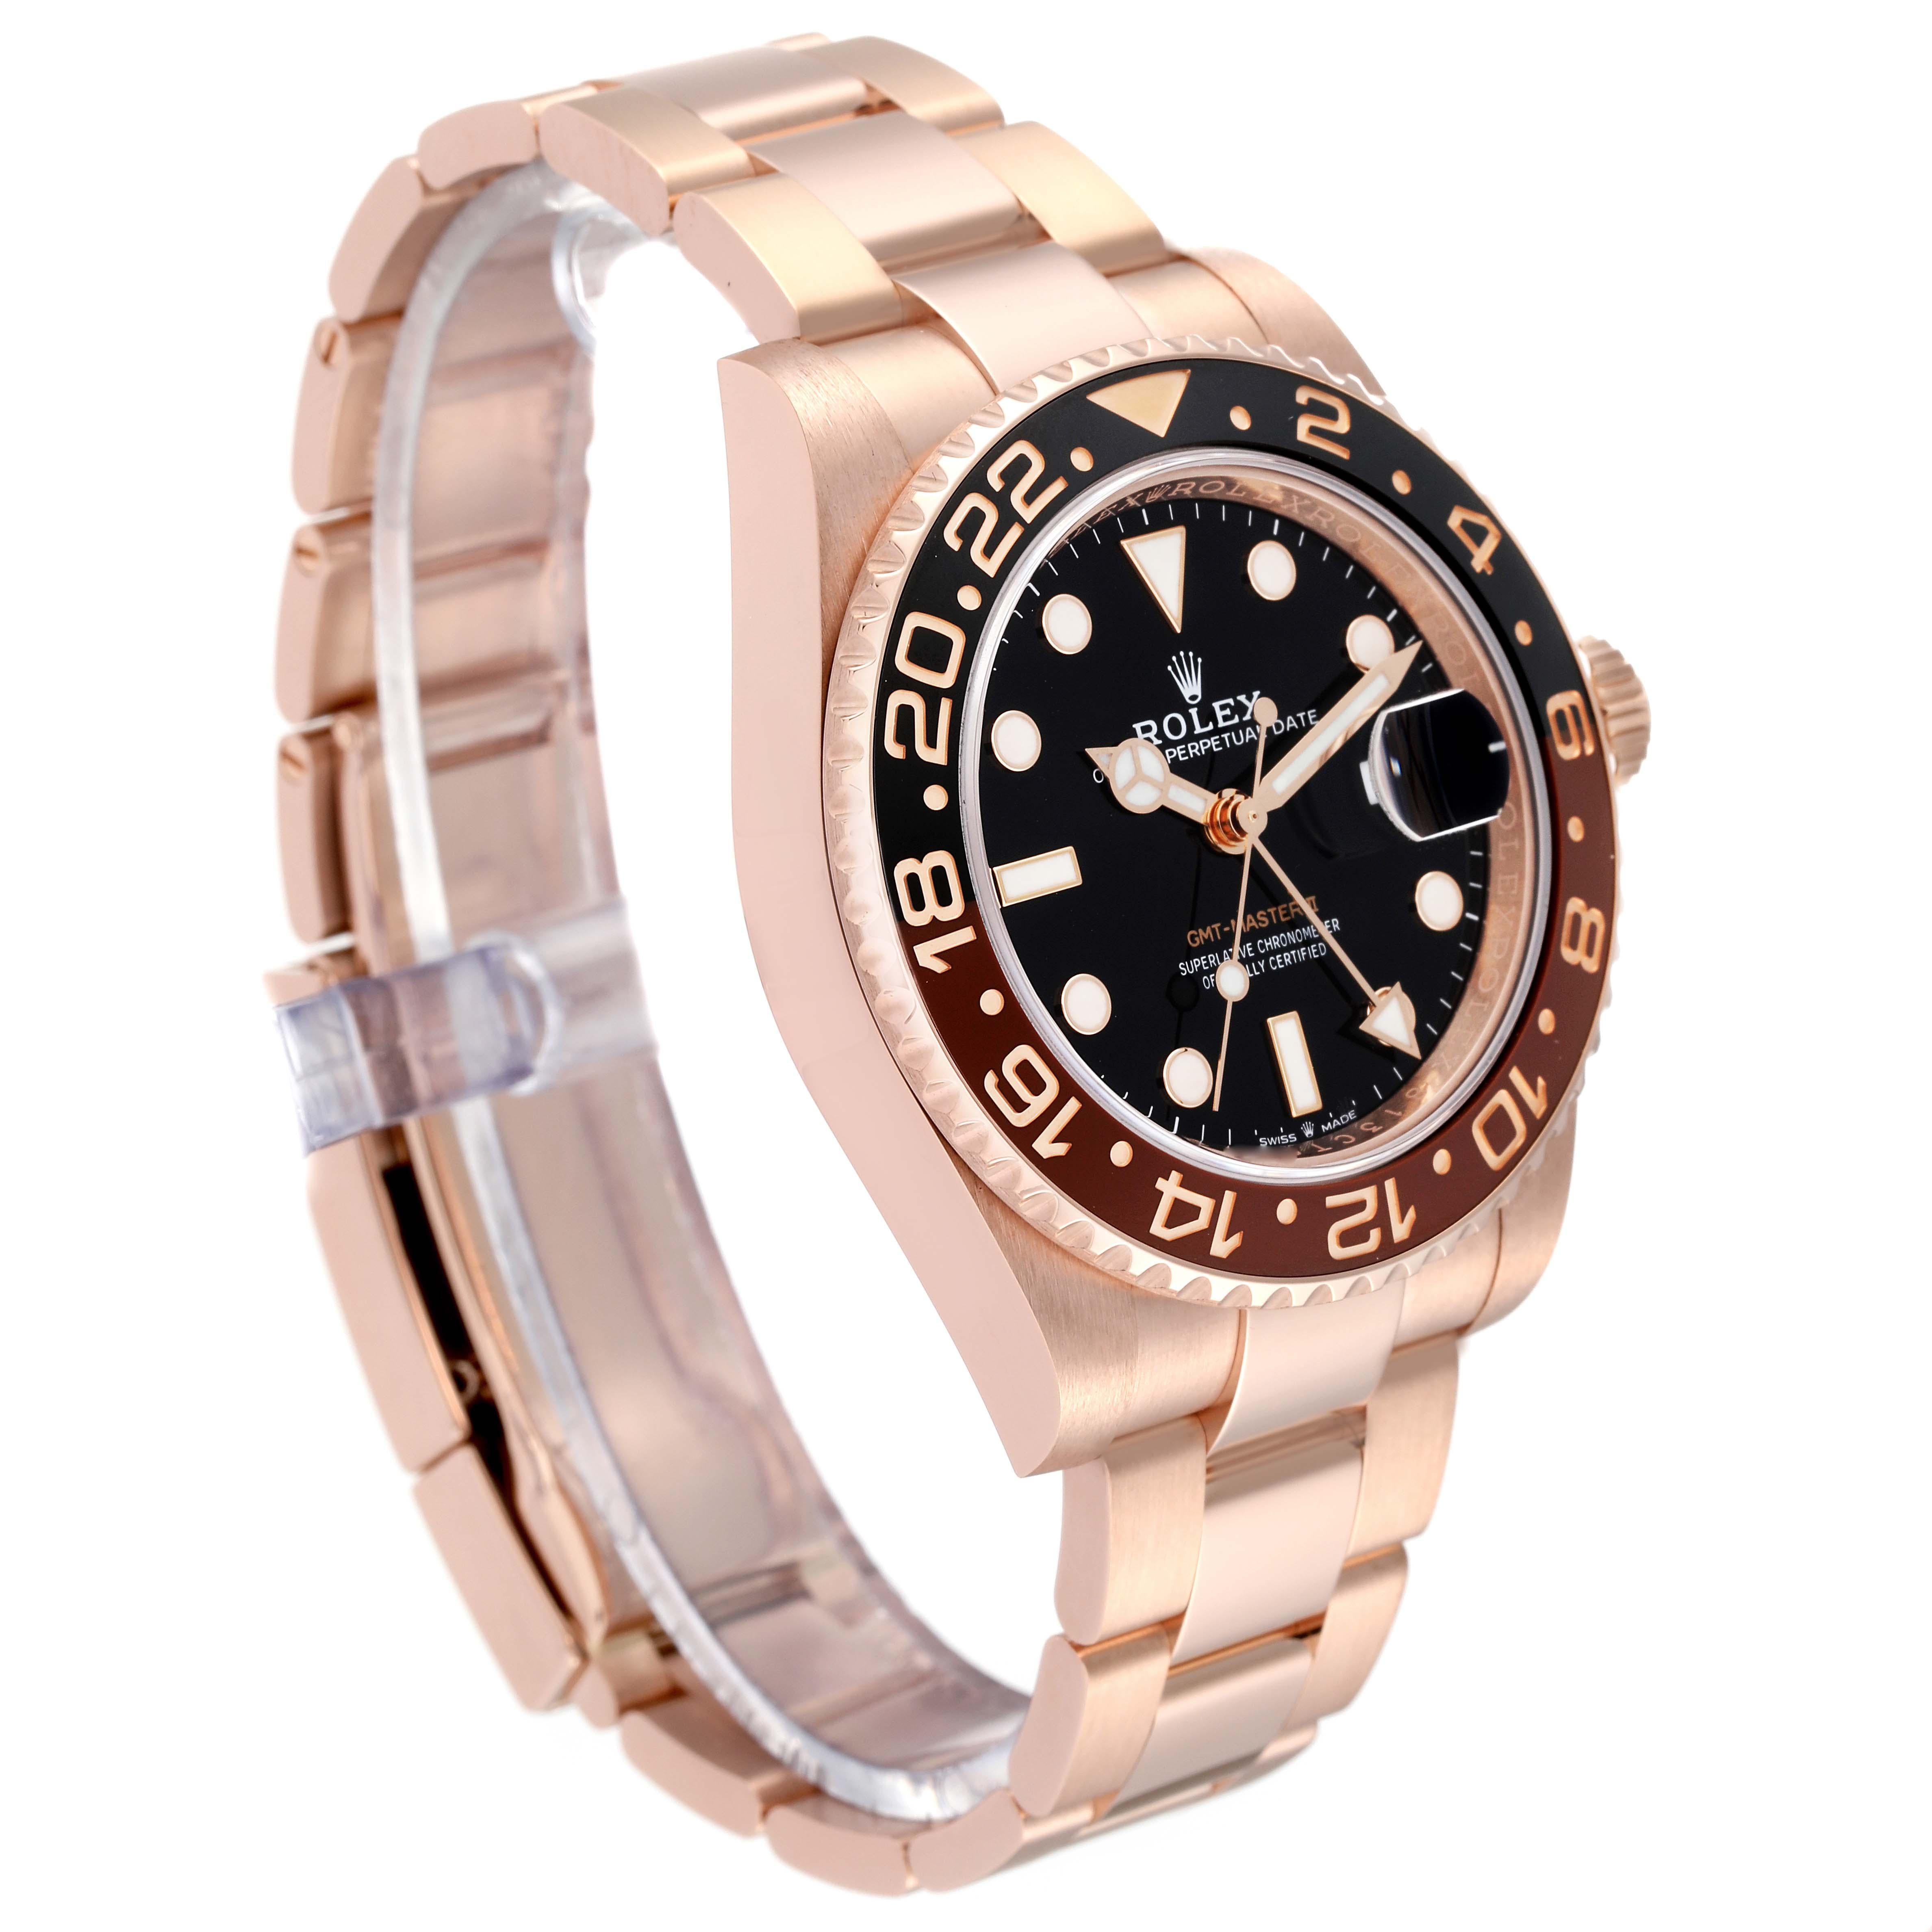 Rolex GMT Master II Black Brown Root Beer Rose Gold Mens Watch 126715 Box Card 1